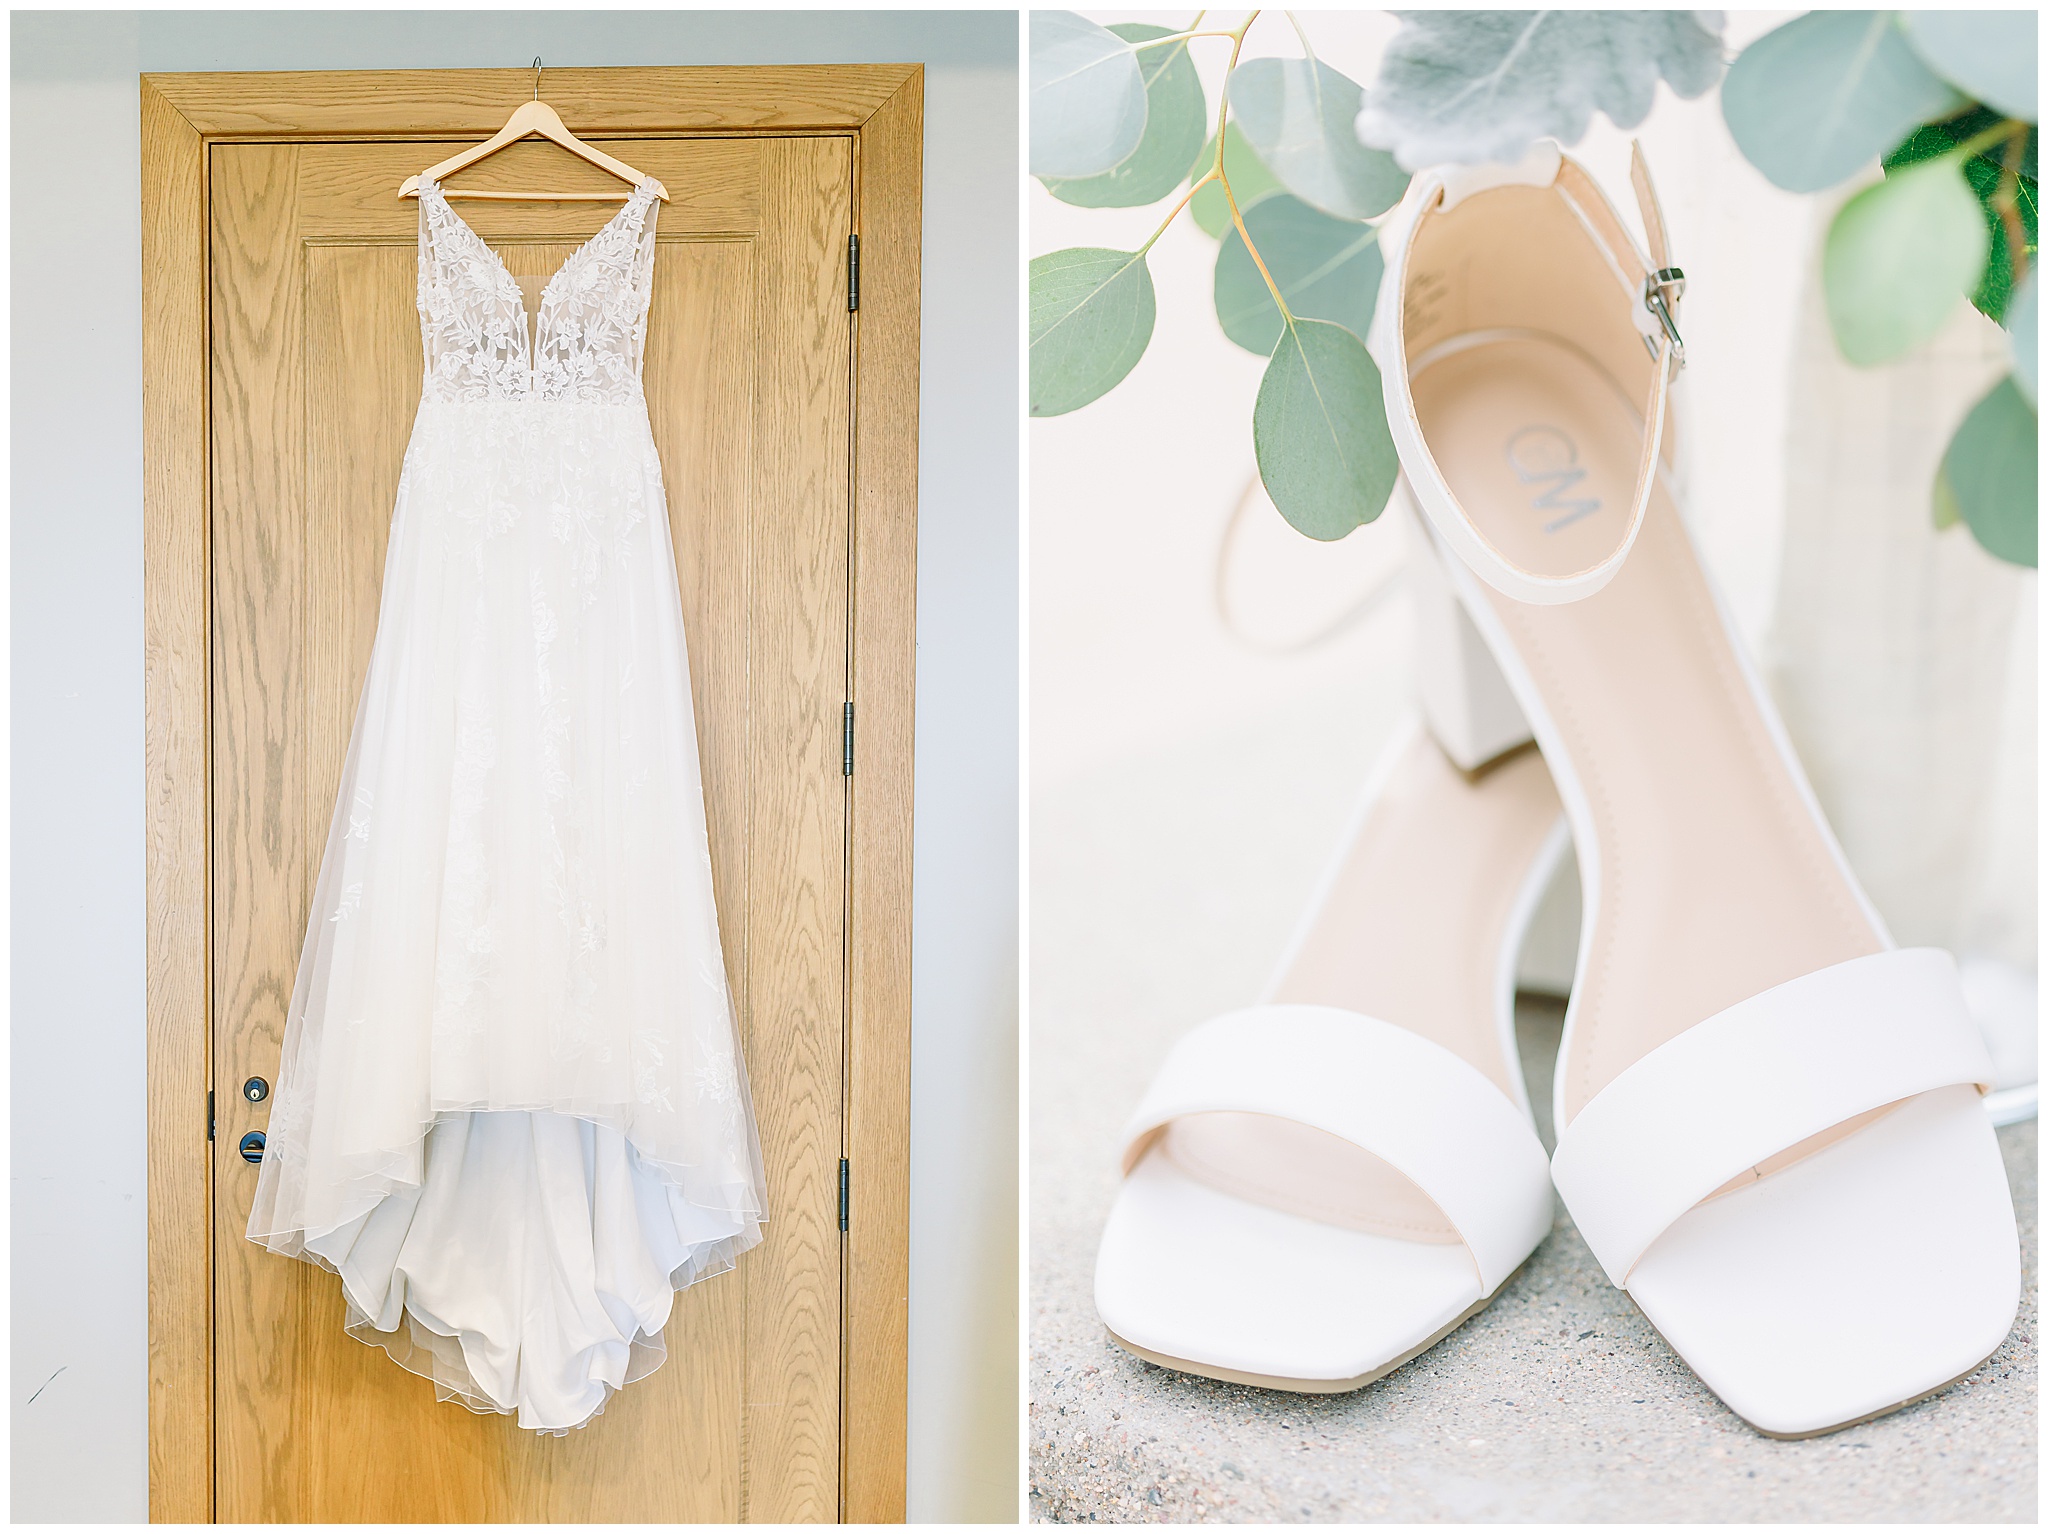 Wedding gown hung on door, bridal shoes